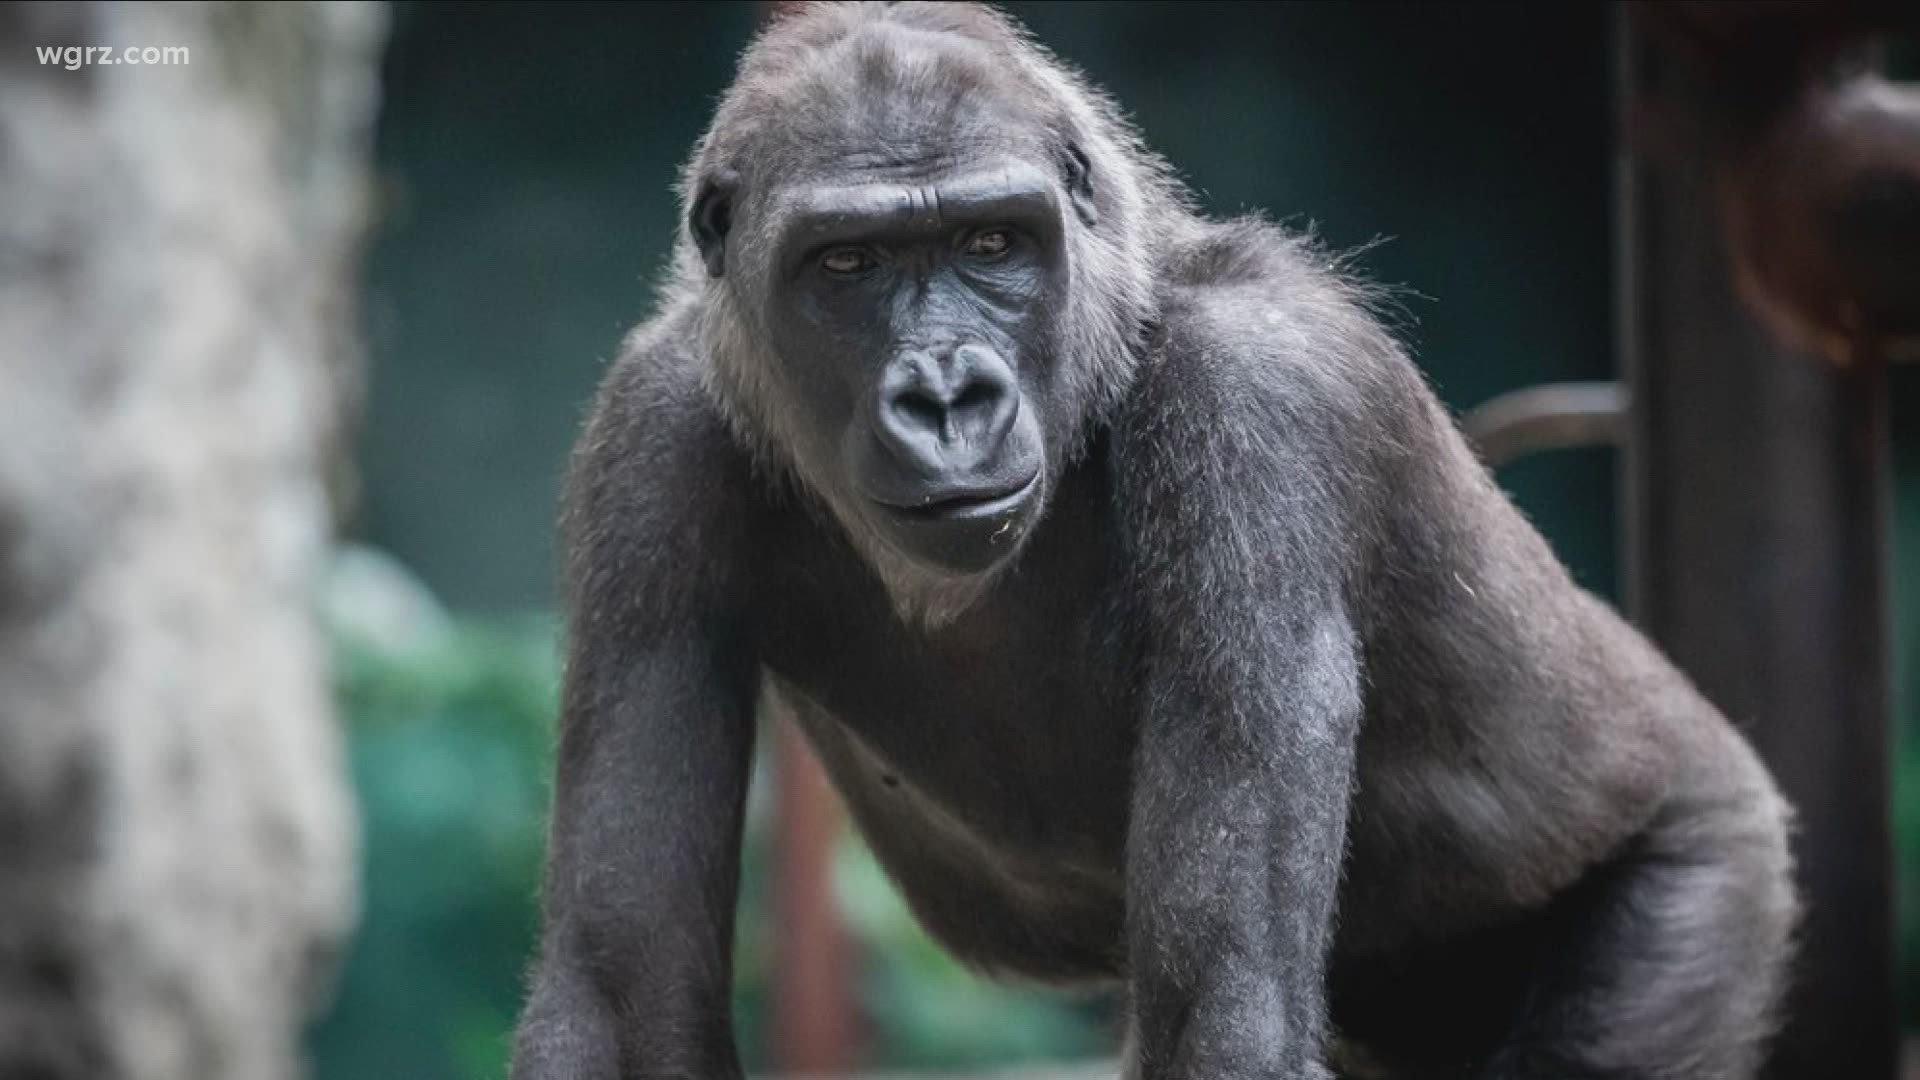 She got a full physical earlier this week, and it included a cardiac exam, something that the zoo noted is important for gorillas as they get older.